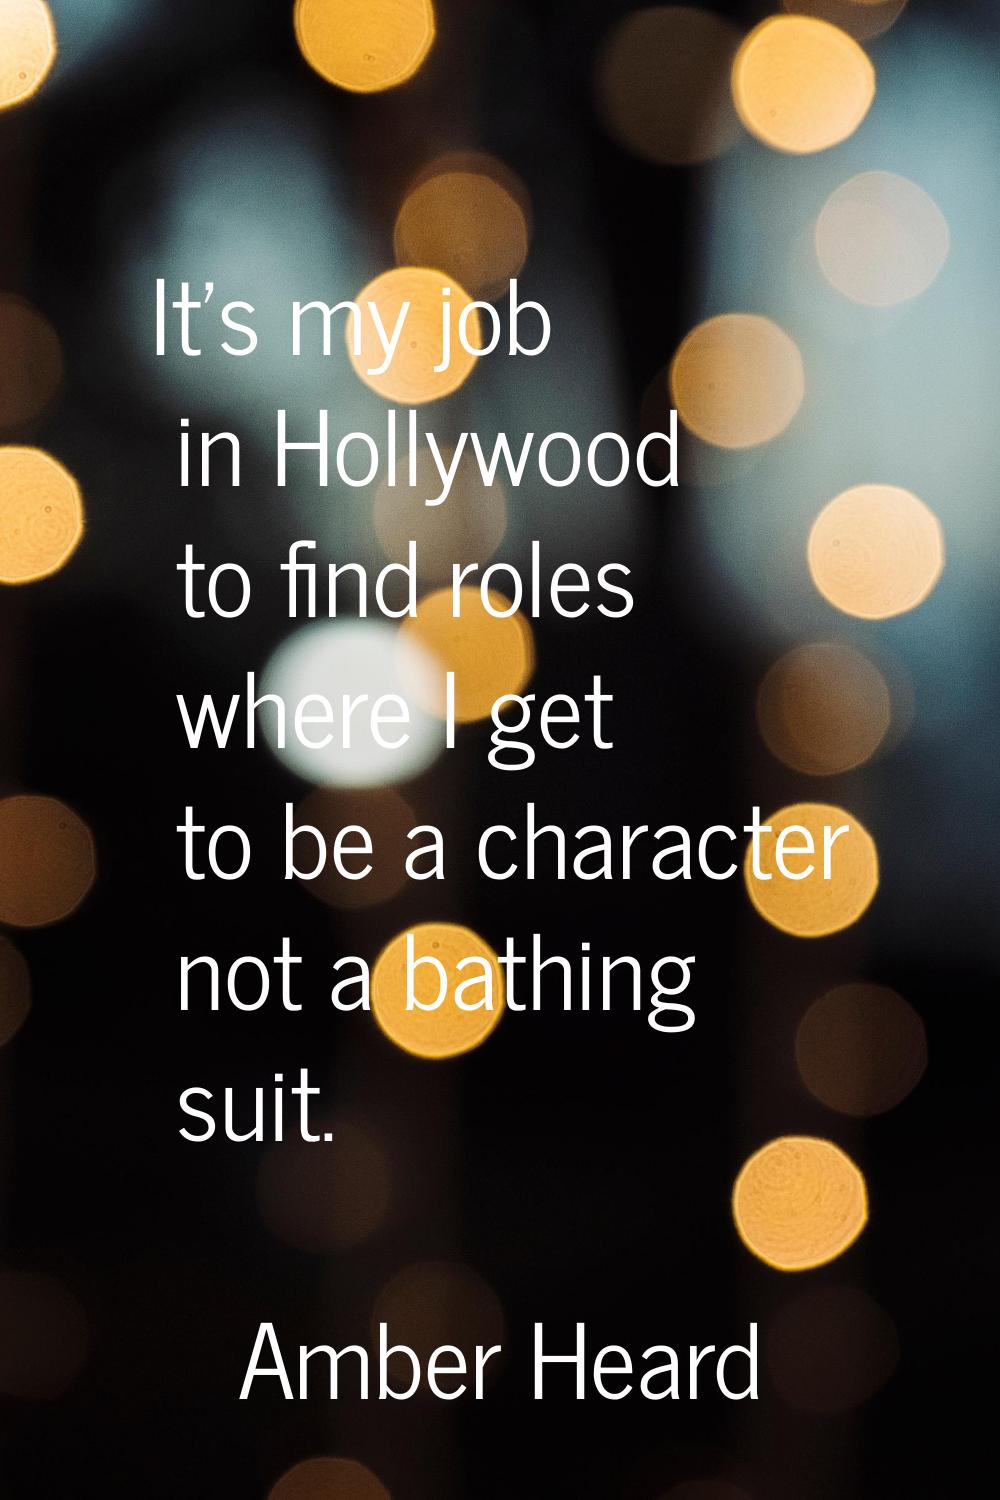 It's my job in Hollywood to find roles where I get to be a character not a bathing suit.